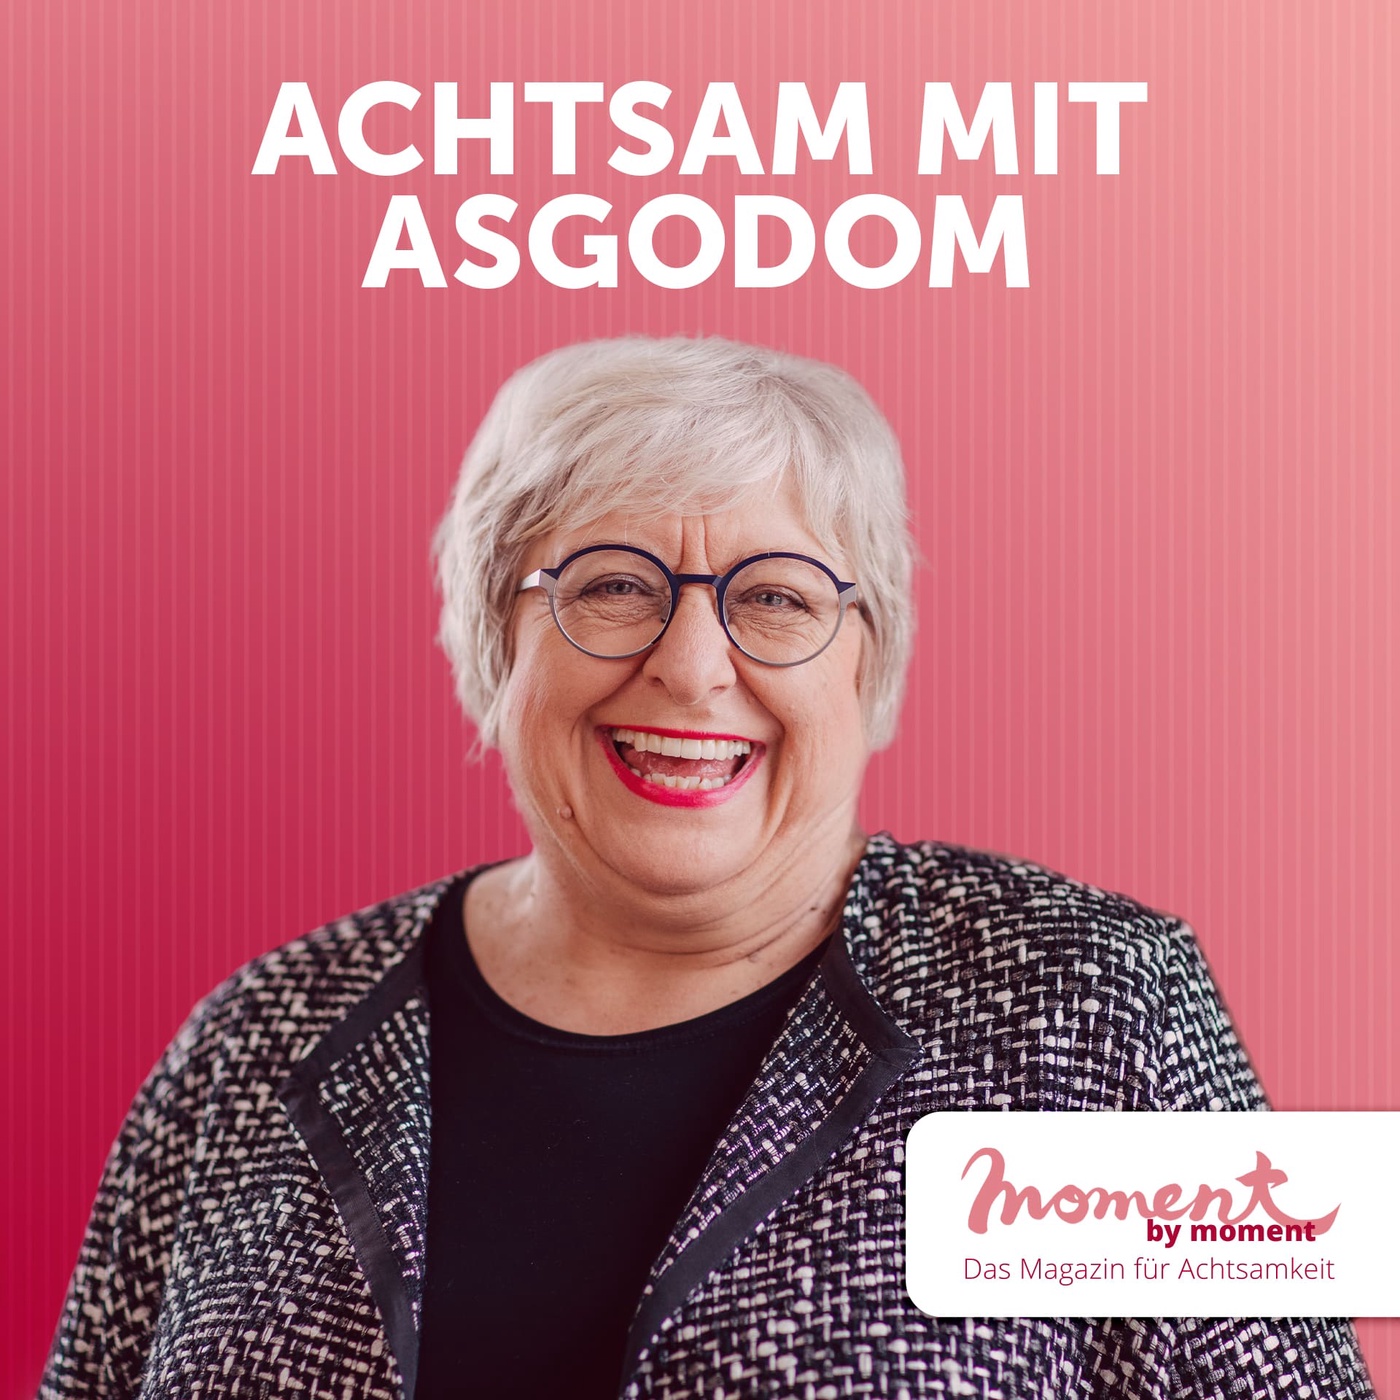 Achtsam mit Asgodom – der moment by moment Podcast